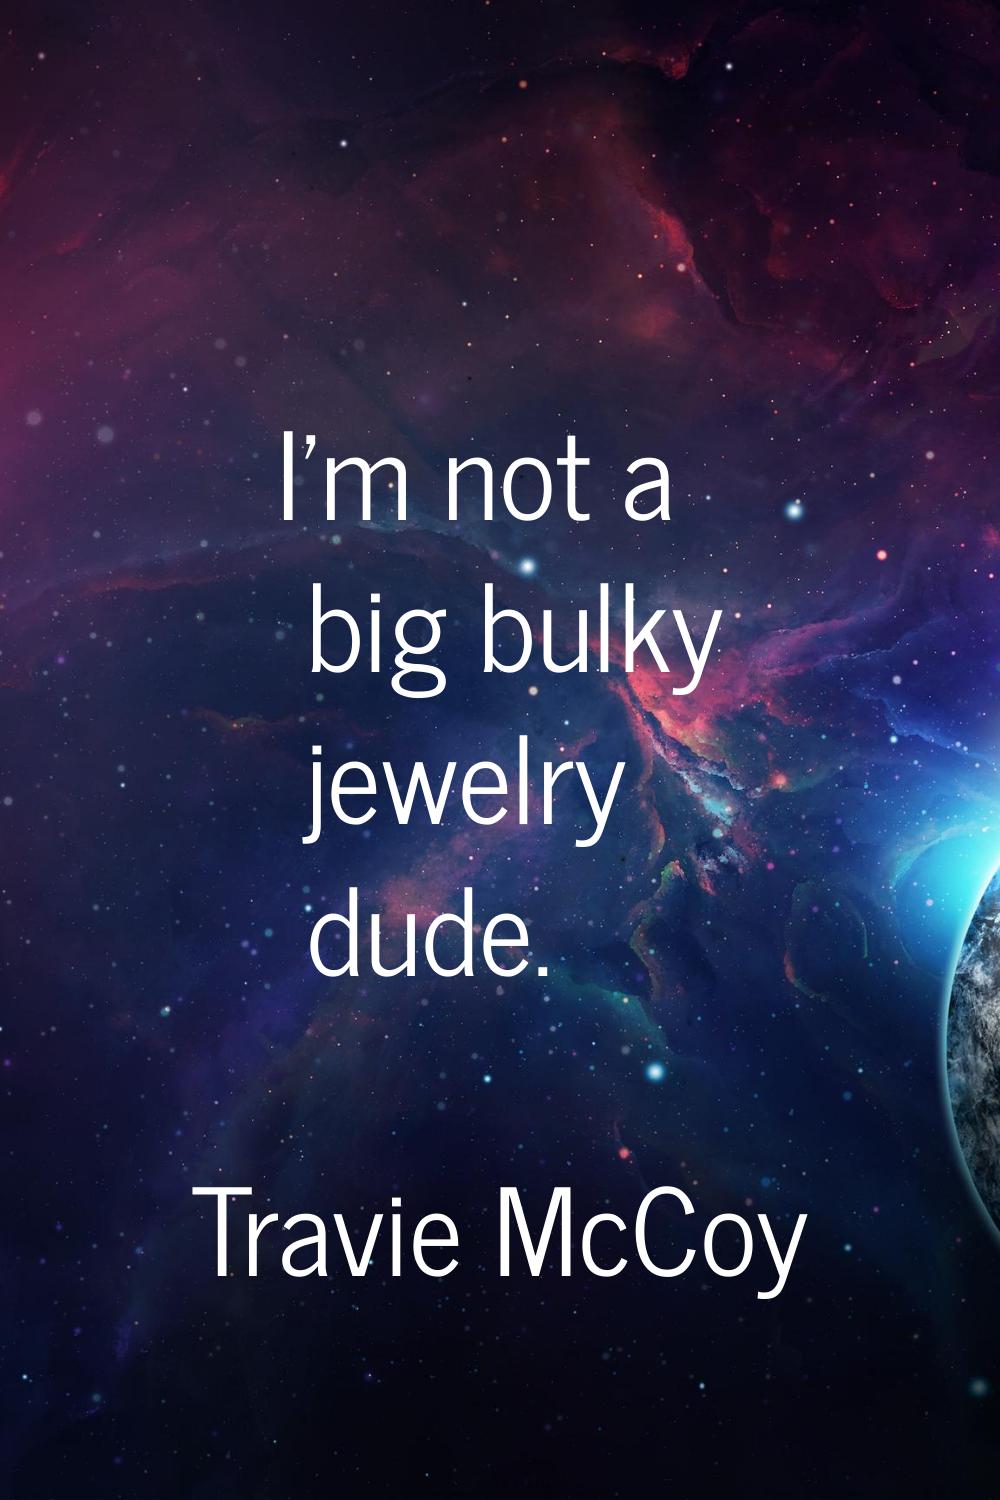 I'm not a big bulky jewelry dude.